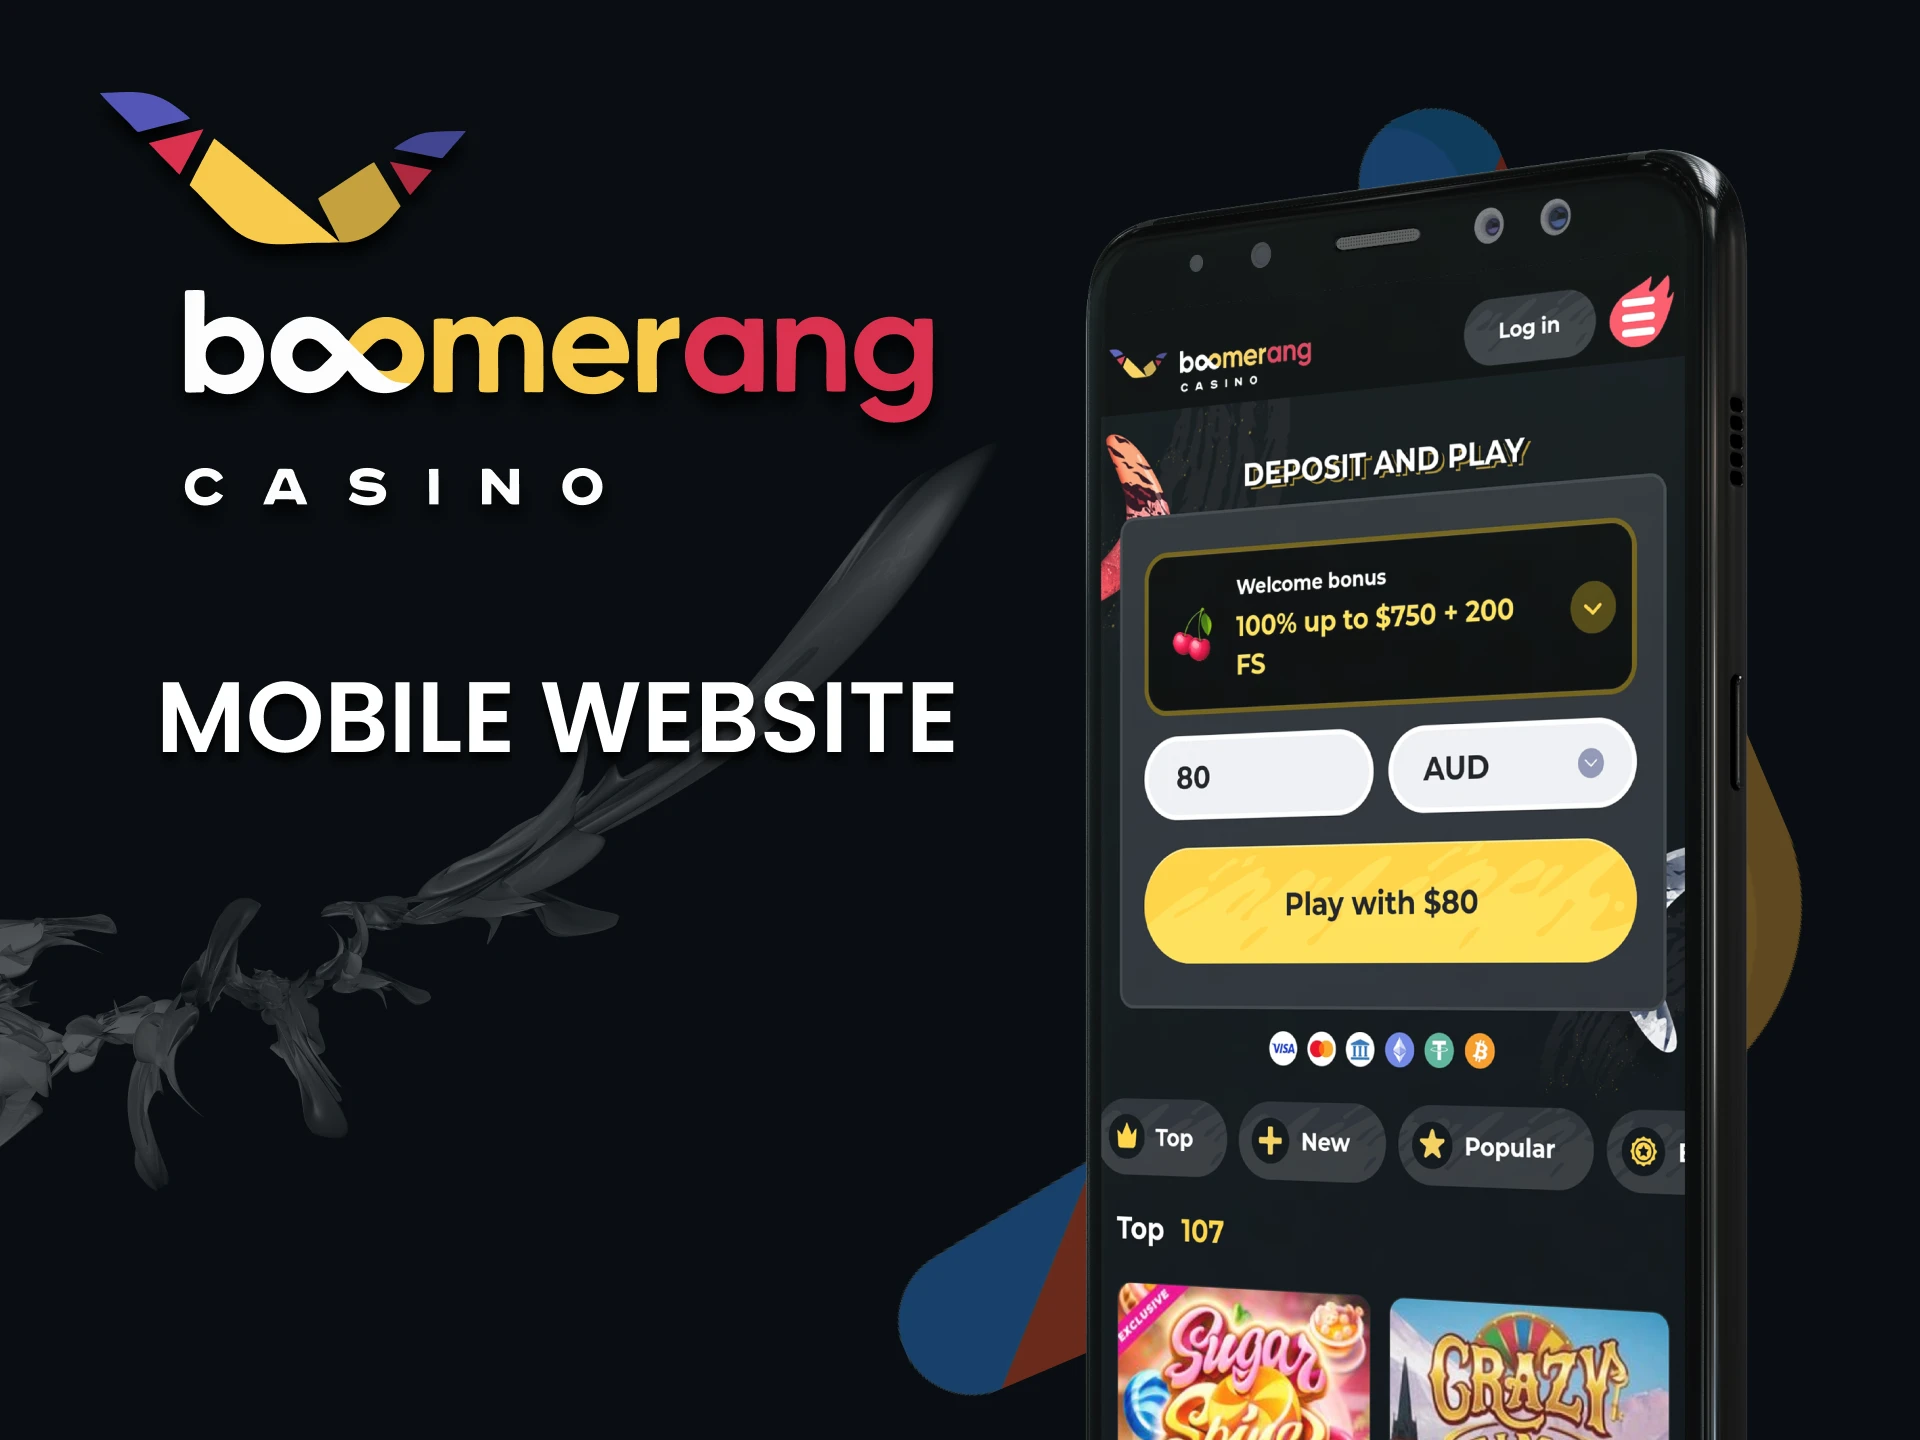 Visit the mobile version of the Boomerang Casino website.